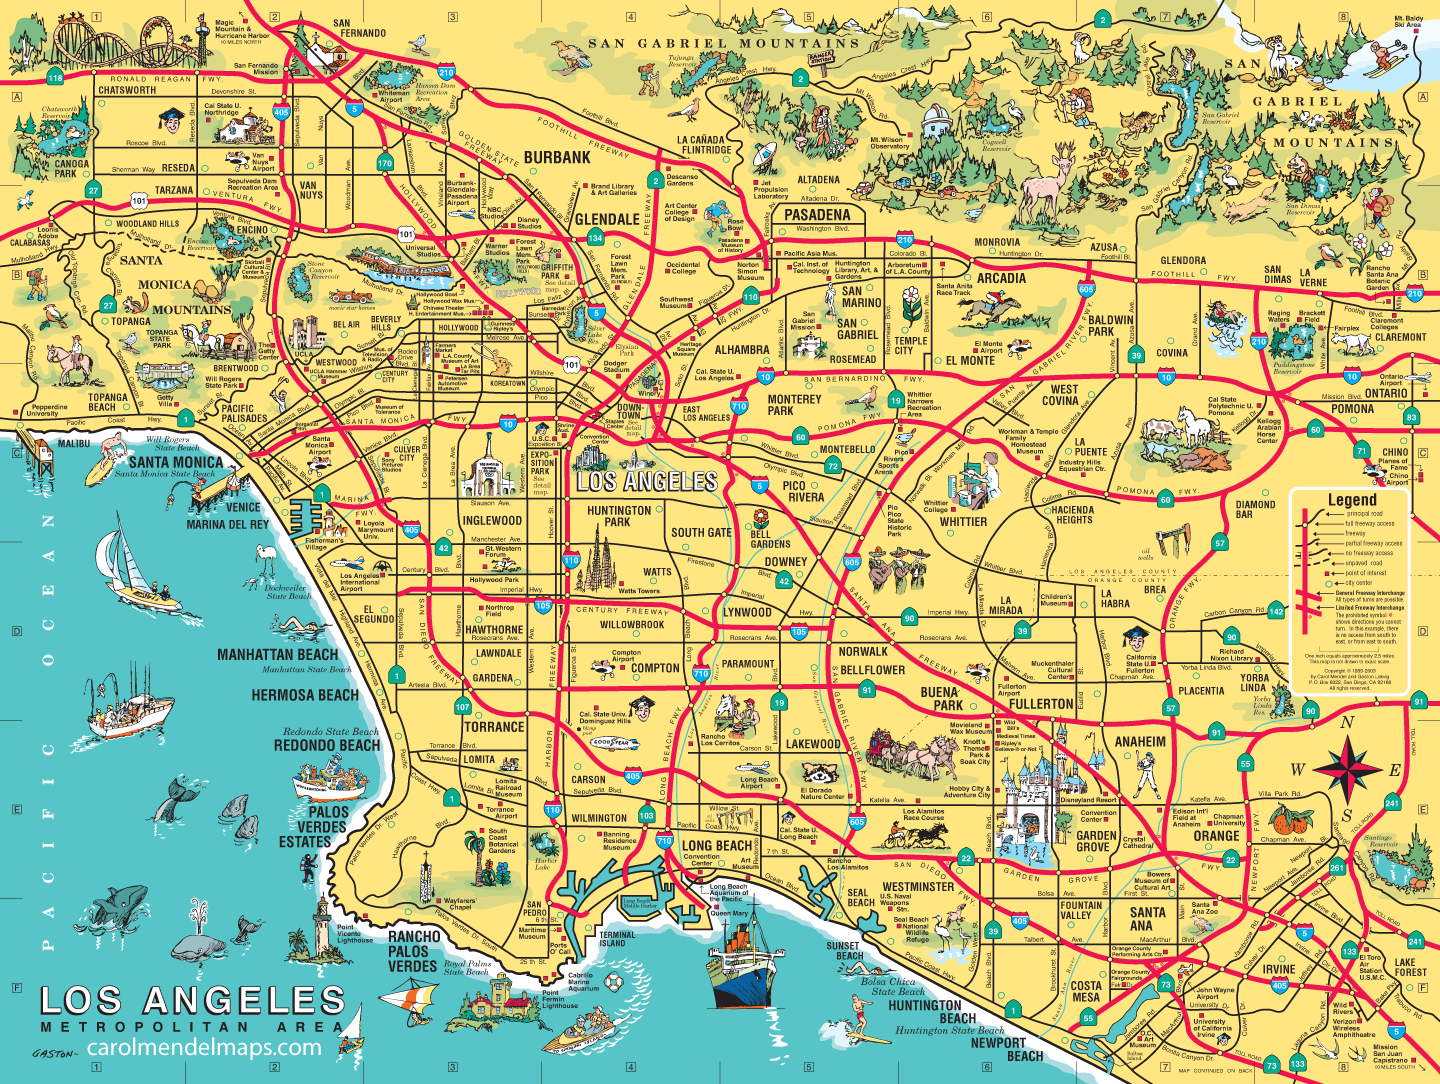 pictorial, illustrated map of the Los Angeles metropolitan area